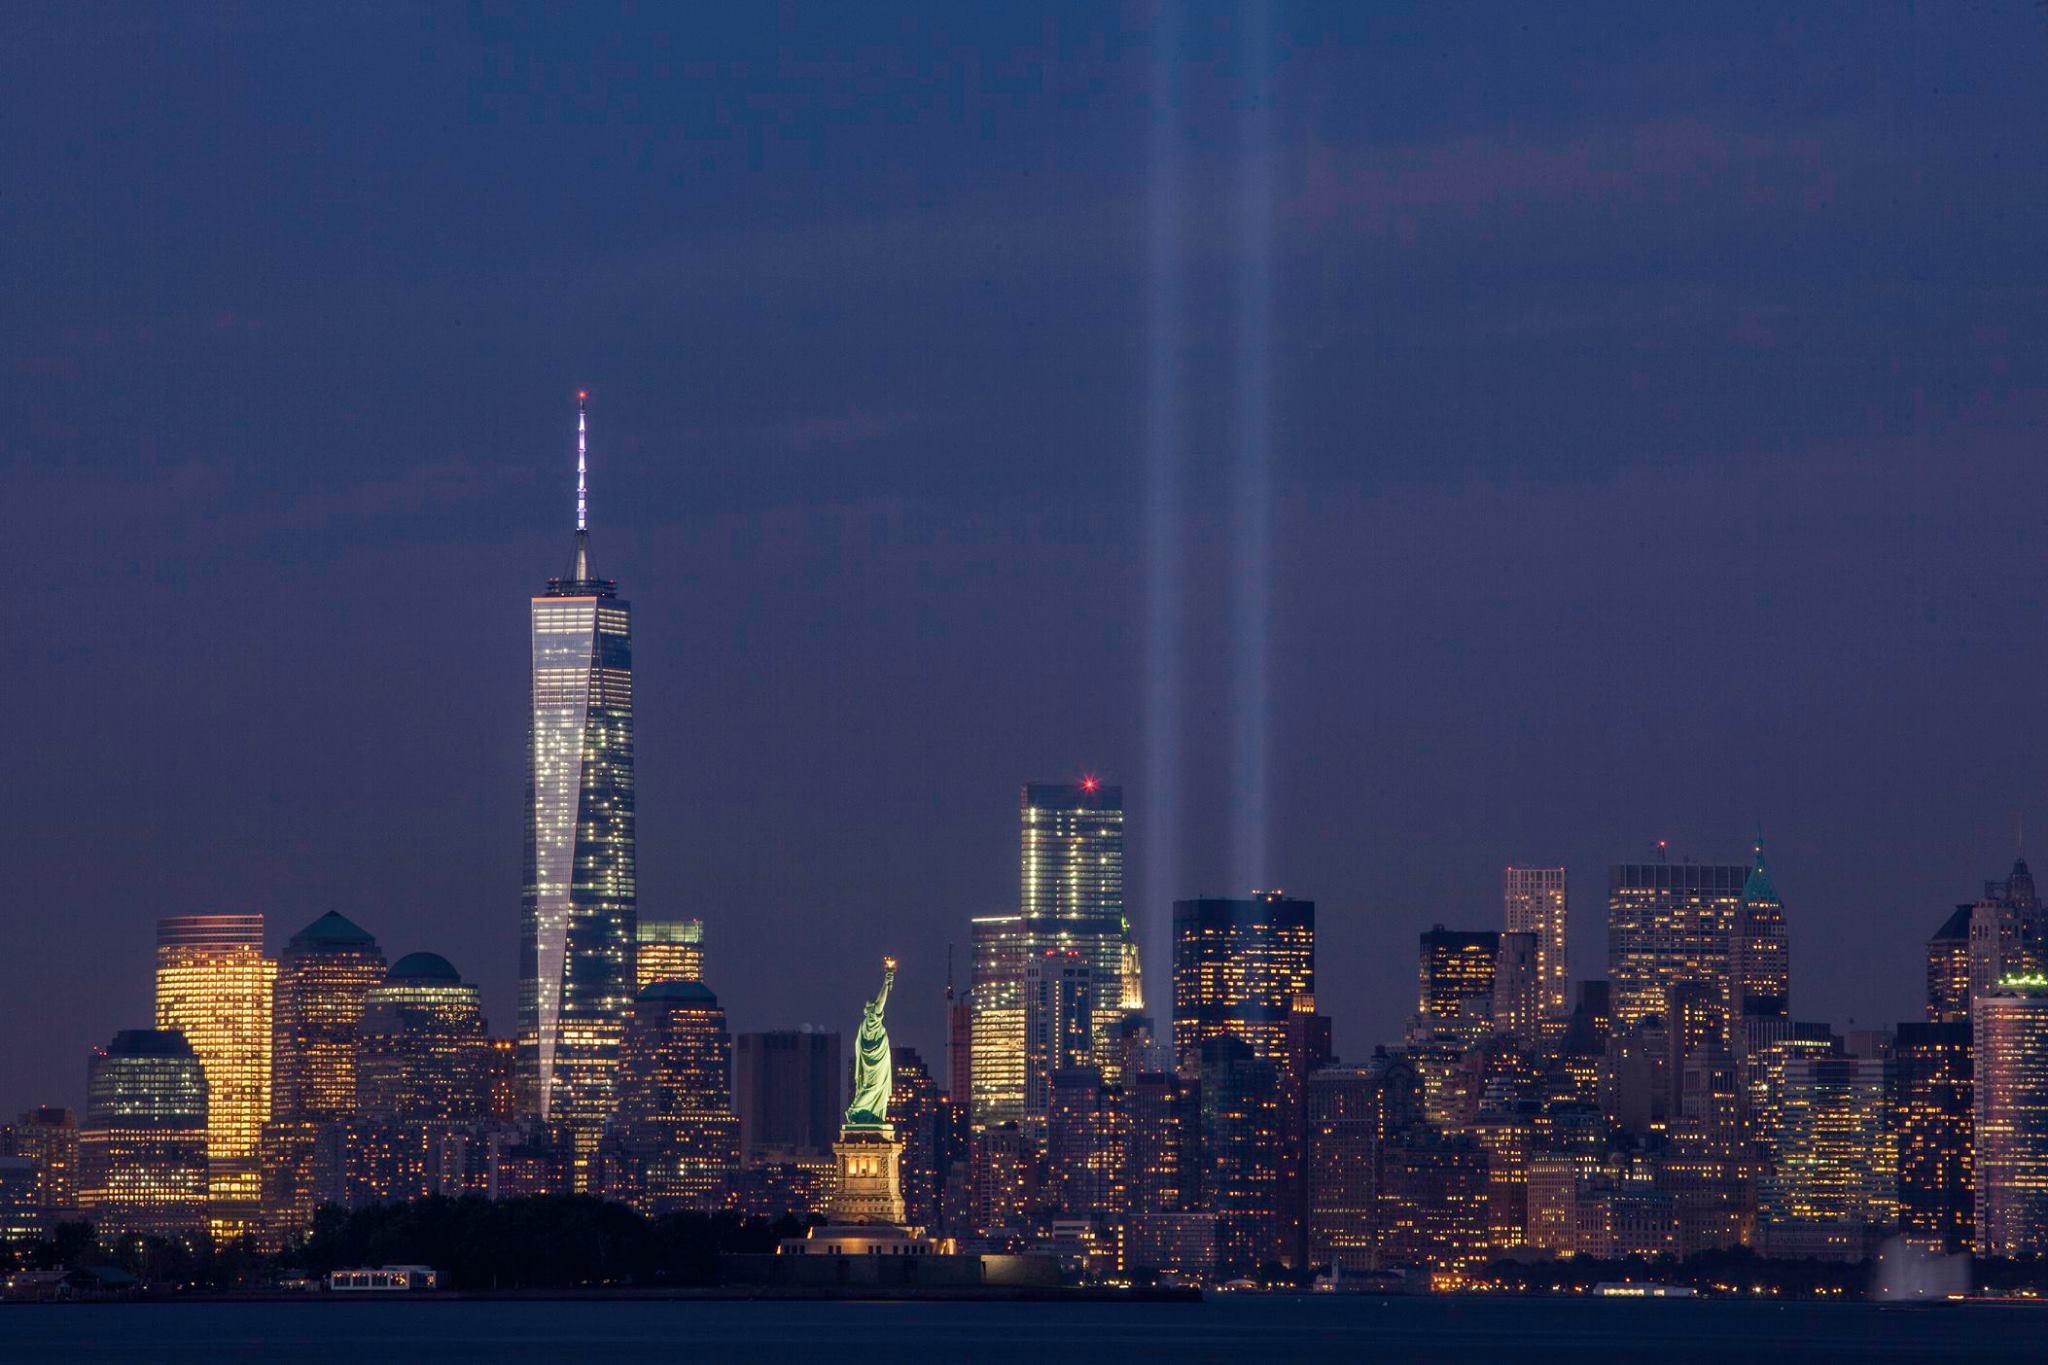 Image from the Tribute in Light on September 11, 2014. It shows the New York City skyline with two beams of light representing the fallen towers.